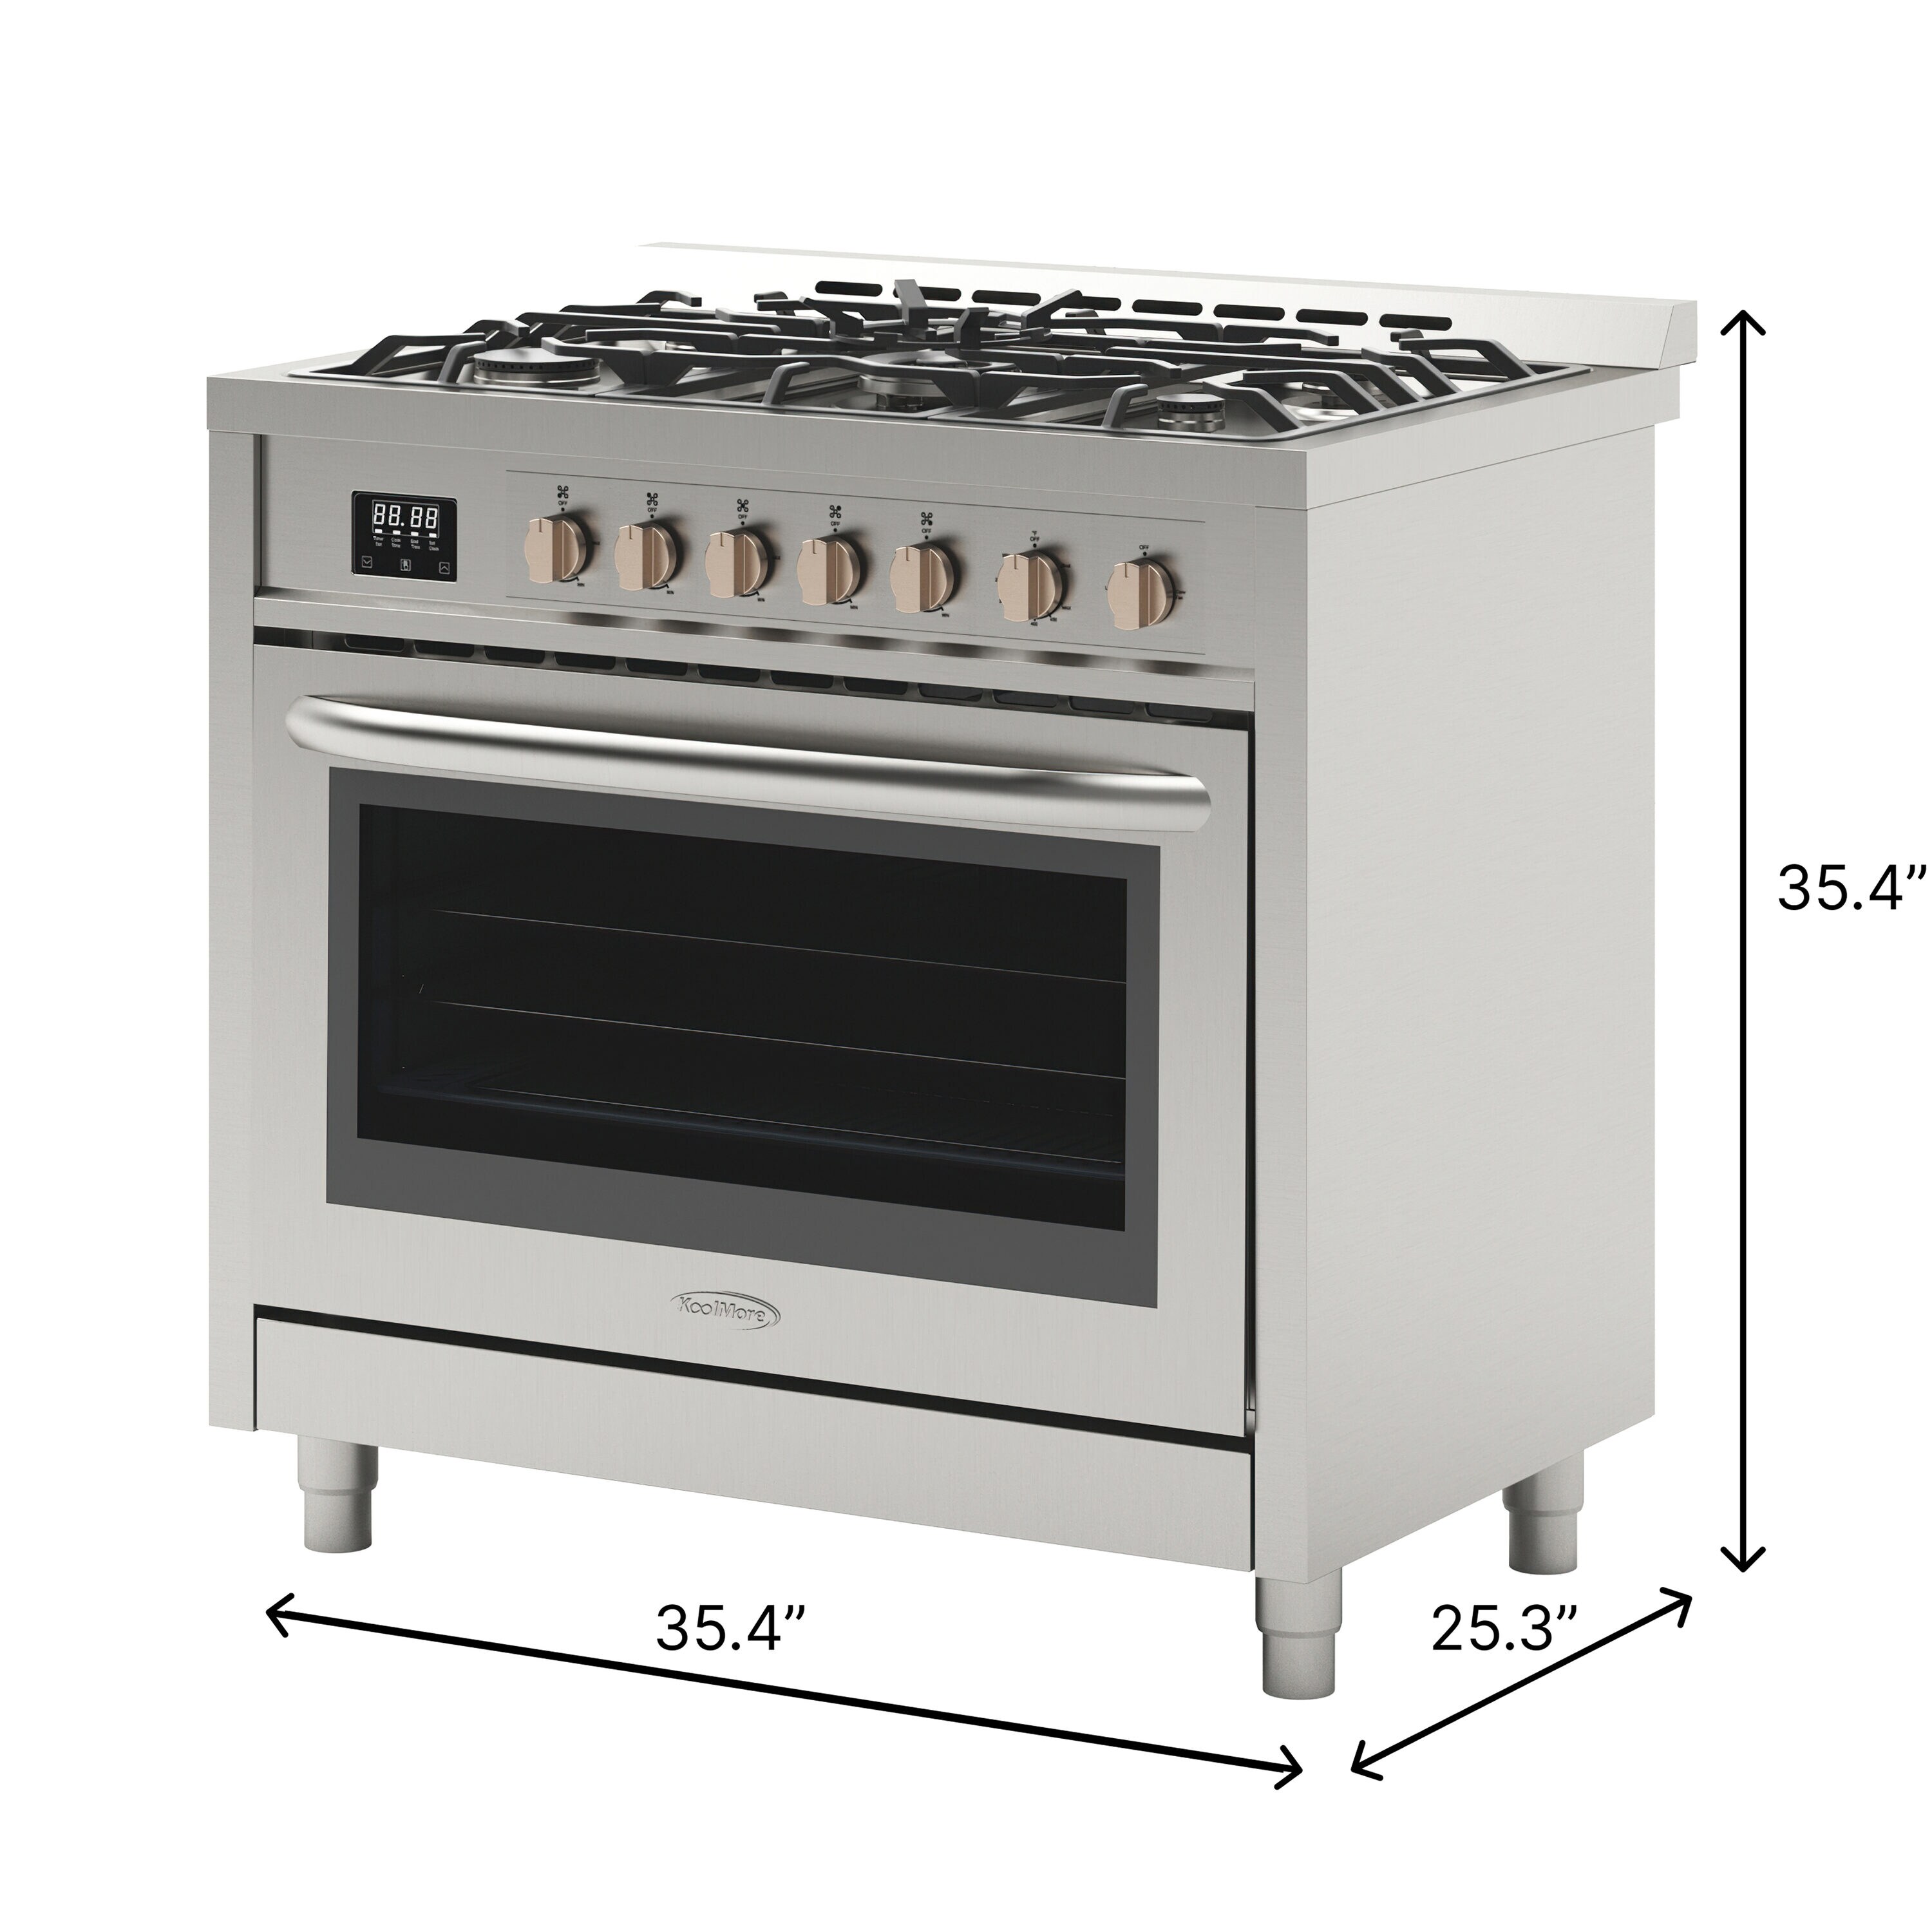 KoolMore 38 in. Full-Size Single Deck Commercial Liquid Propane Convection  Oven 54,000 BTU with Casters in Stainless-Steel(KM-CCO54-LPC)